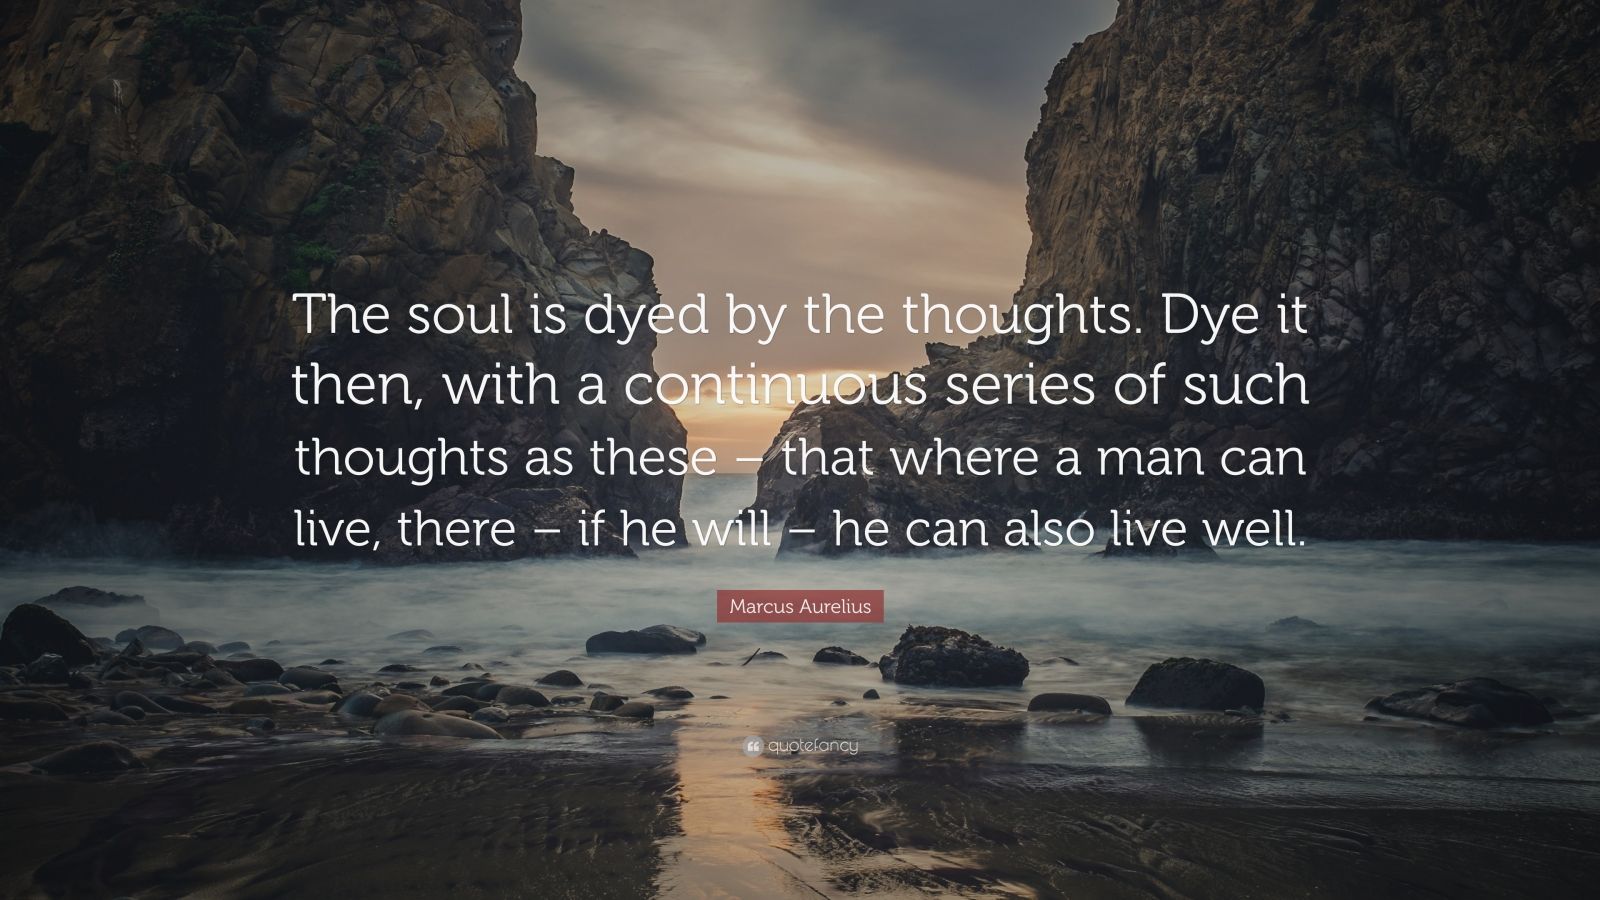 Marcus Aurelius Quote: “The soul is dyed by the thoughts. Dye it then ...